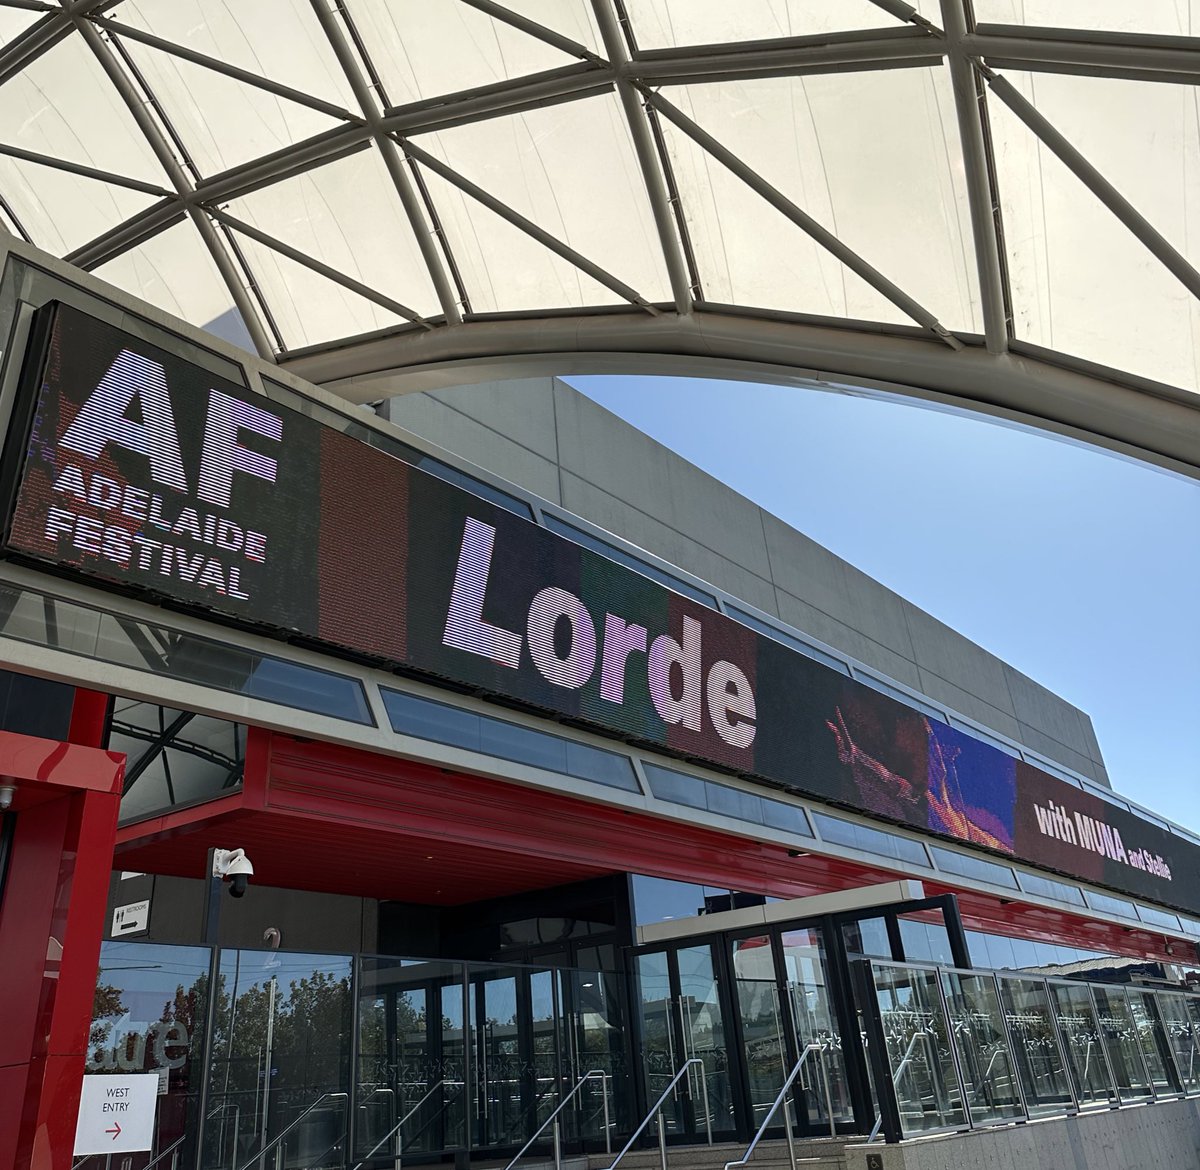 let’s fkn go!!!!!!!!!!!! @lorde 

#lorde #solarpowertour #adelaidefestival